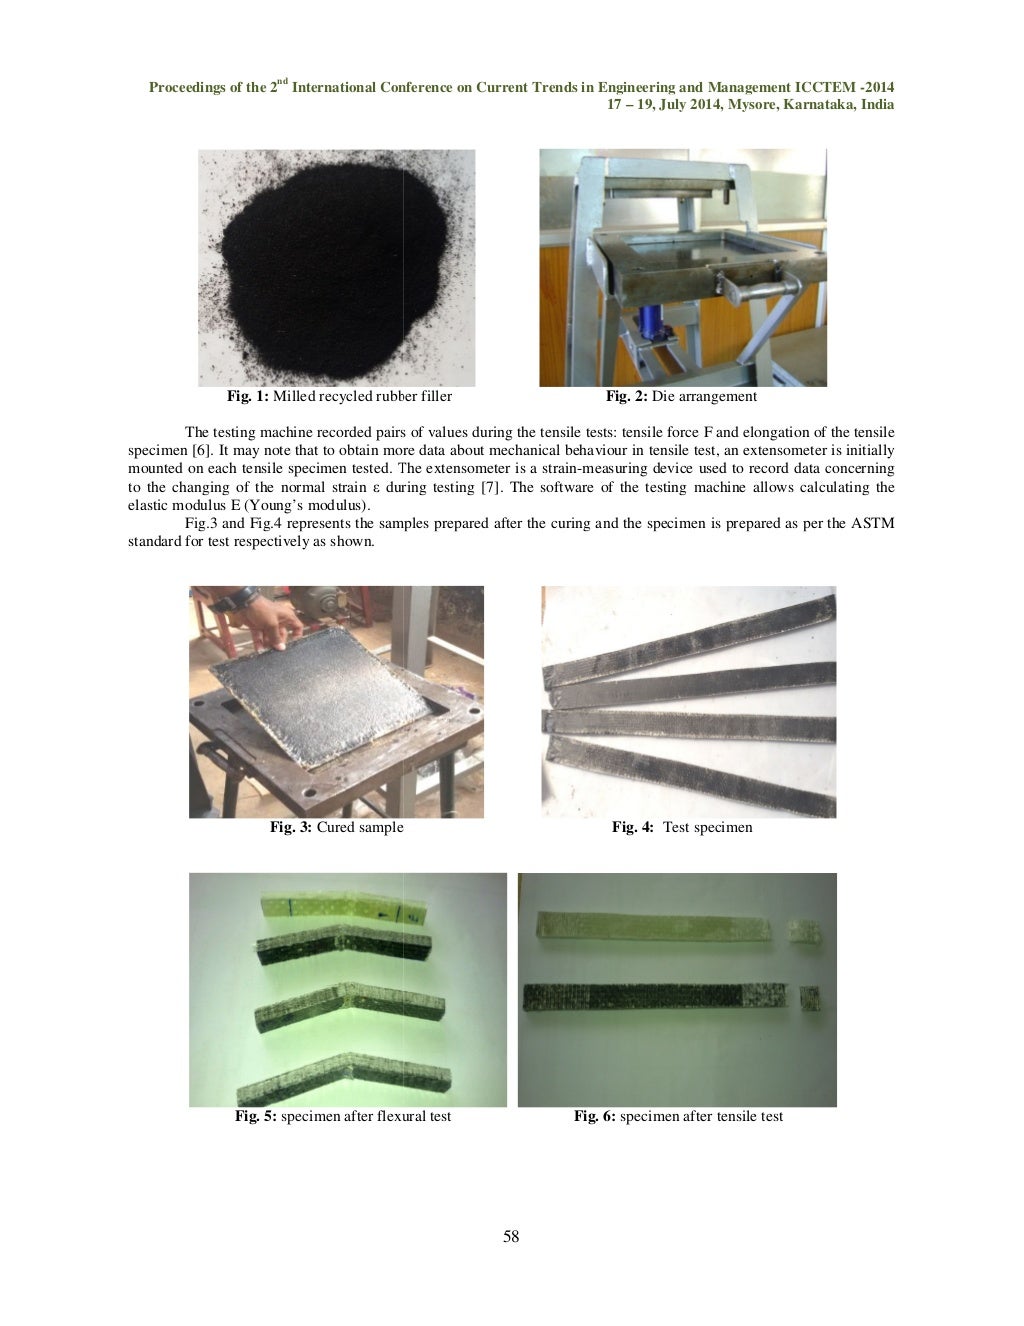 INFLUENCE OF RECYCLED RUBBER FILLER ON MECHANICAL BEHAVIOUR OF WOVEN